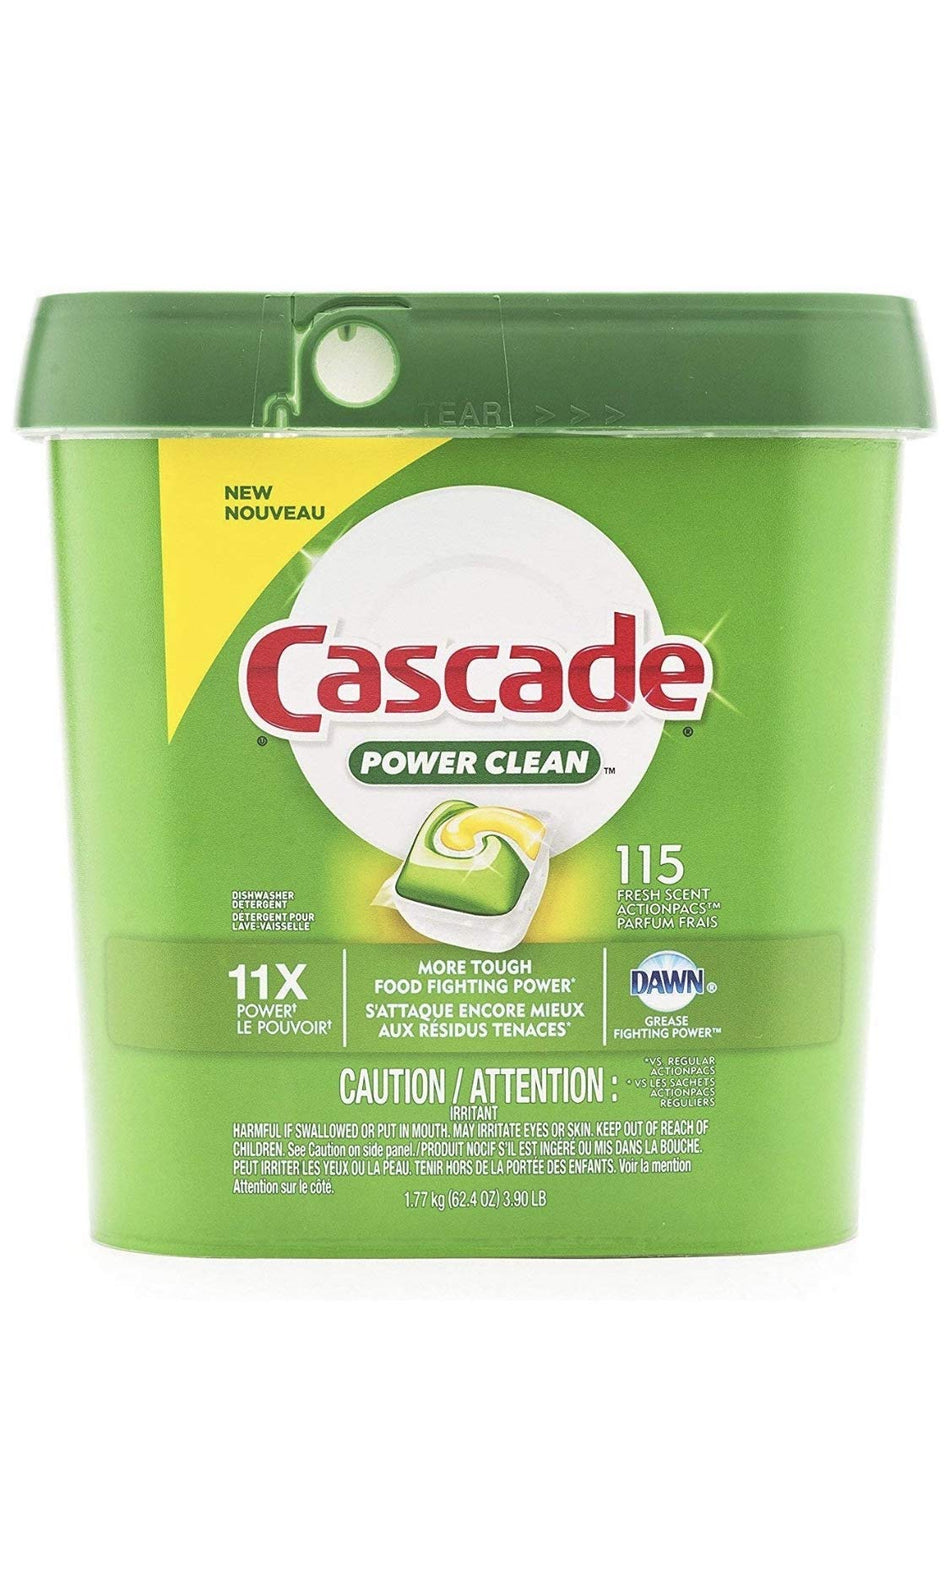 Cascade Power Clean Dishwasher Pods | 115 Dishwasher Detergent Pacs – New and Improved Formula – Fresh Scent